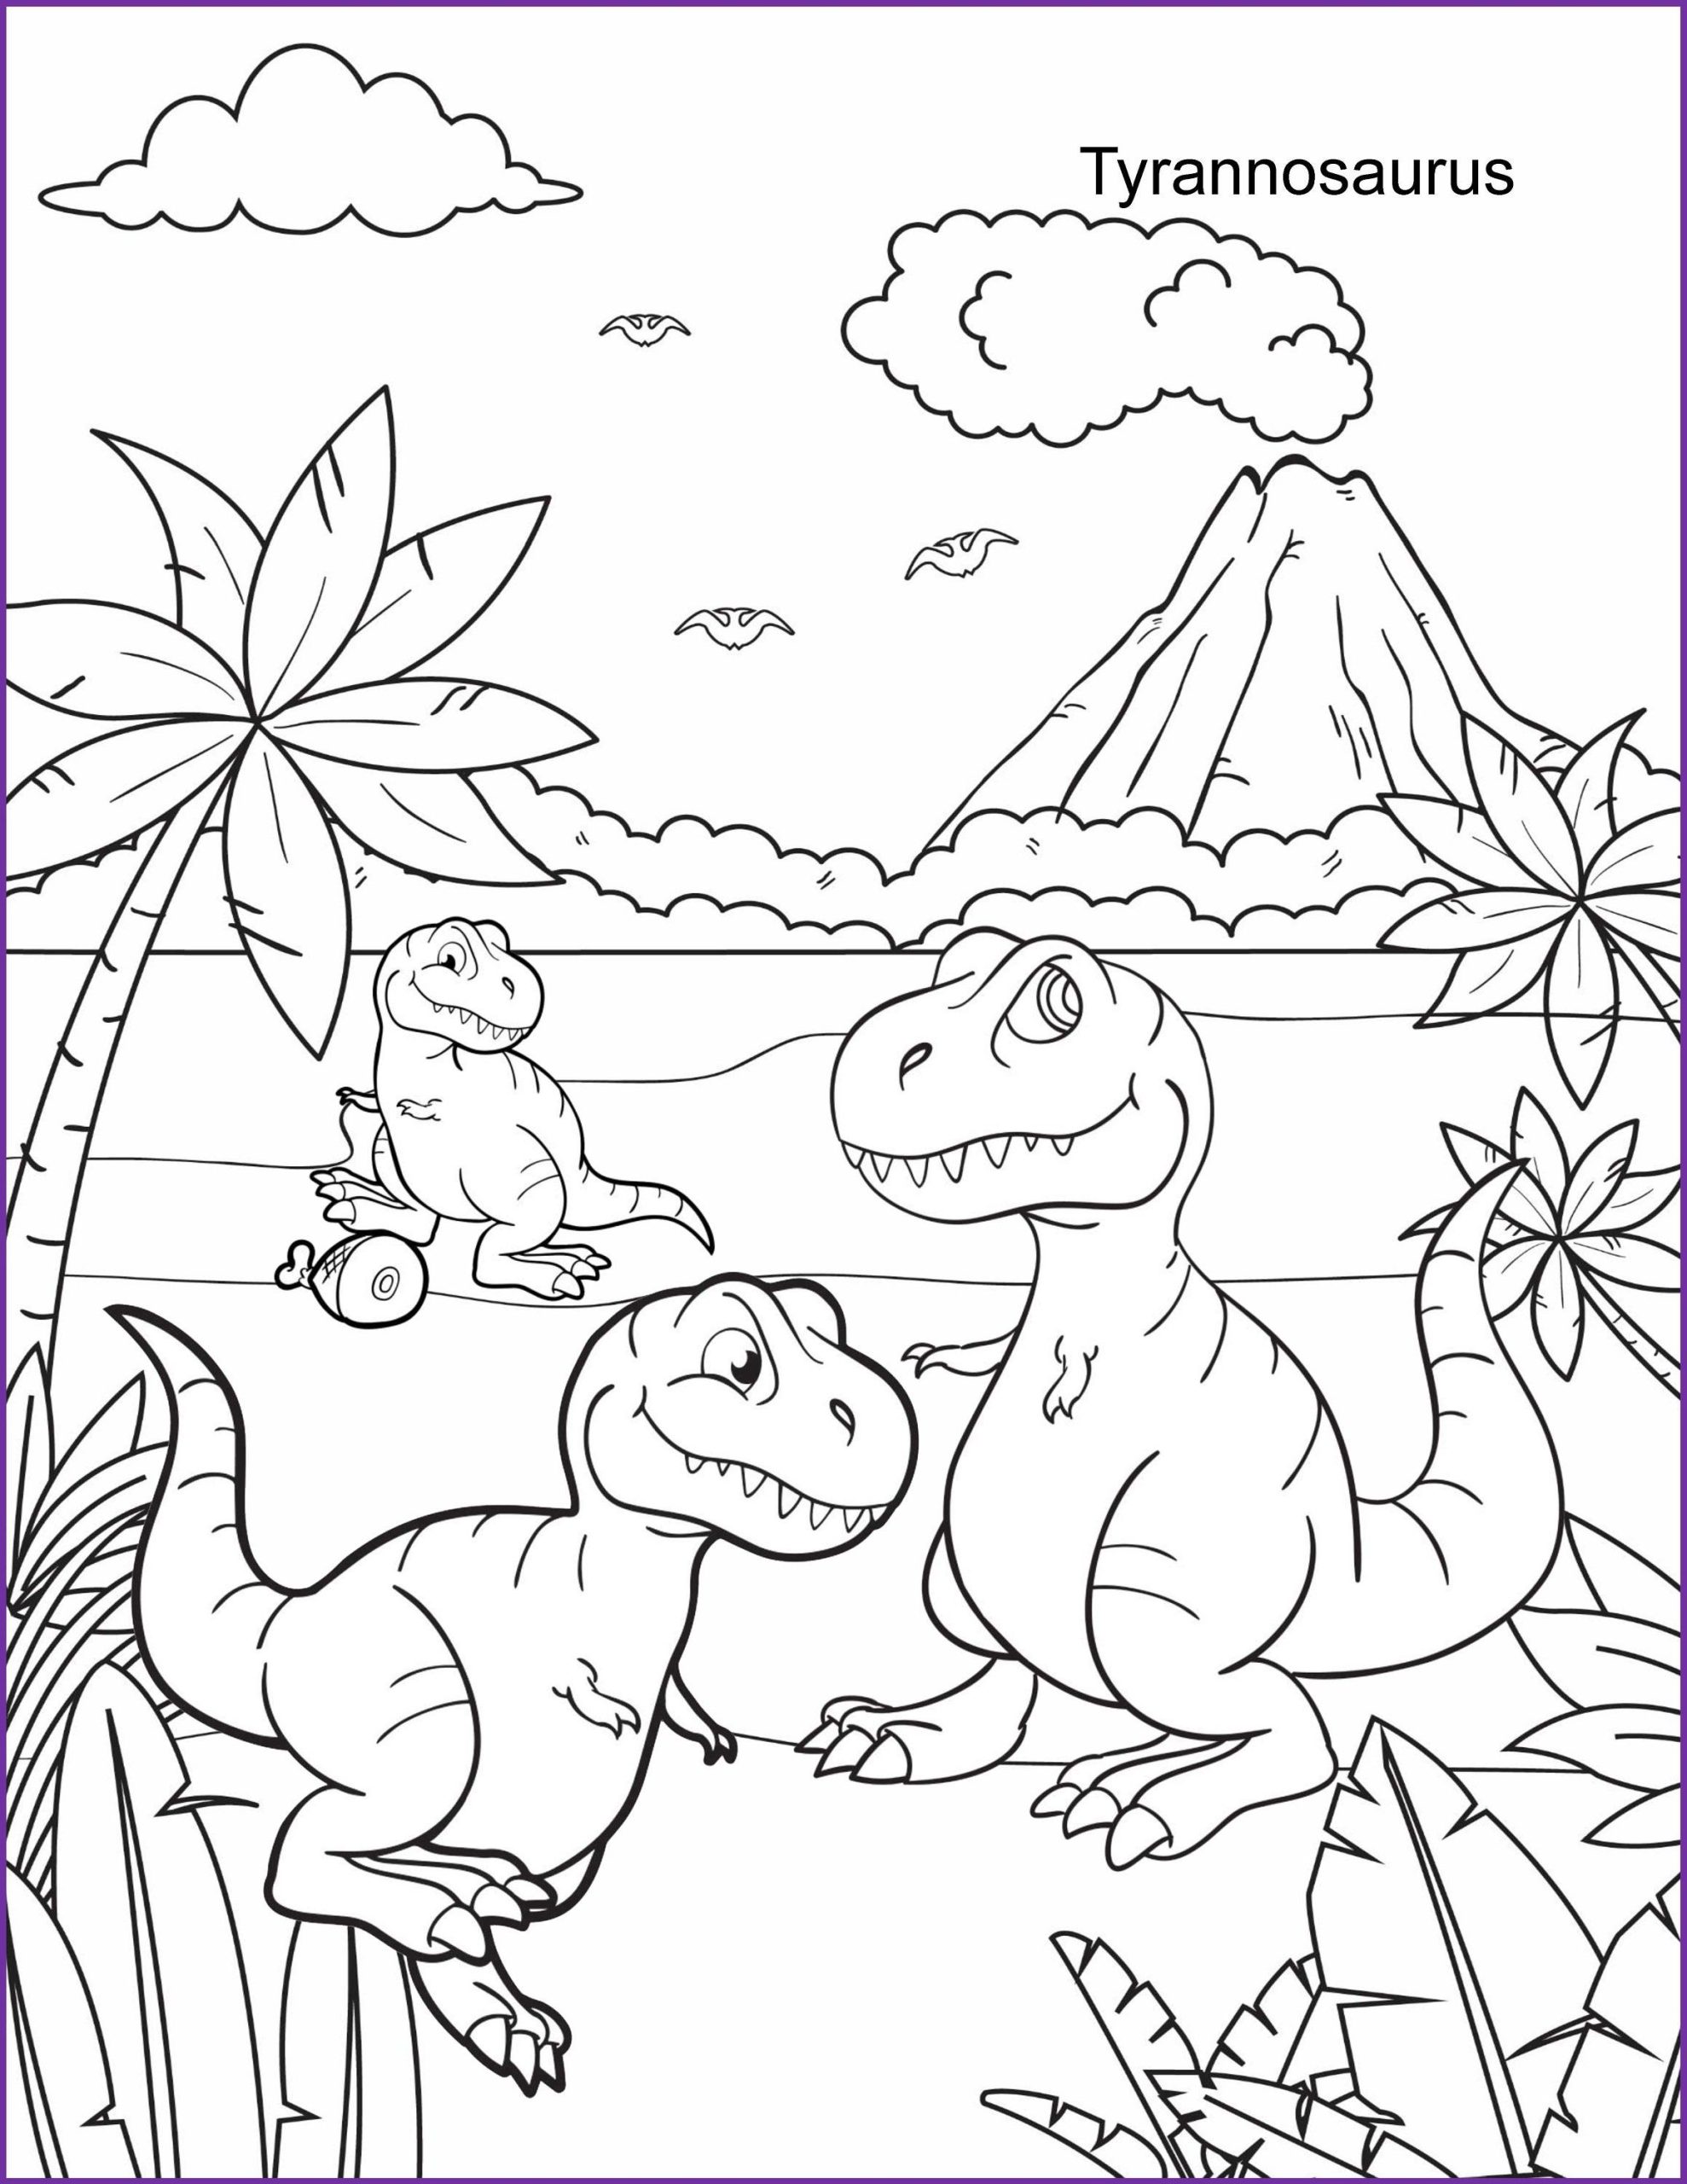 Coloring Pages for Kids, Dinosaurs and Jurassic Backgrounds - INSTANT DOWNLOAD